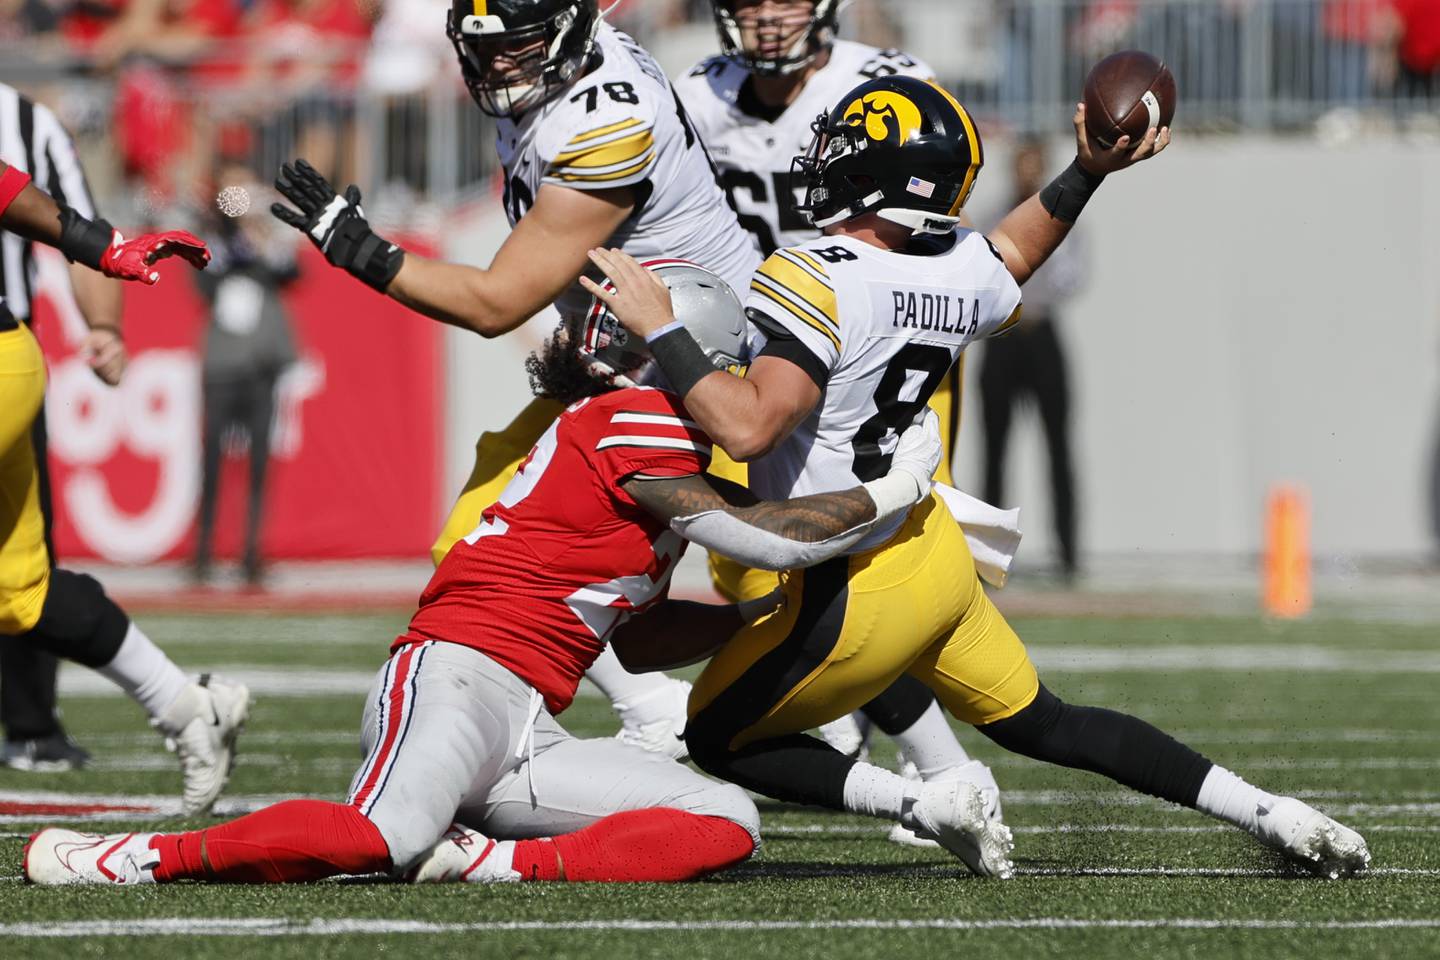 Ohio State linebacker Steele Chambers, left, forces Iowa quarterback Alex Padilla to throw an incomplete pass during a game on Saturday in Columbus, Ohio.